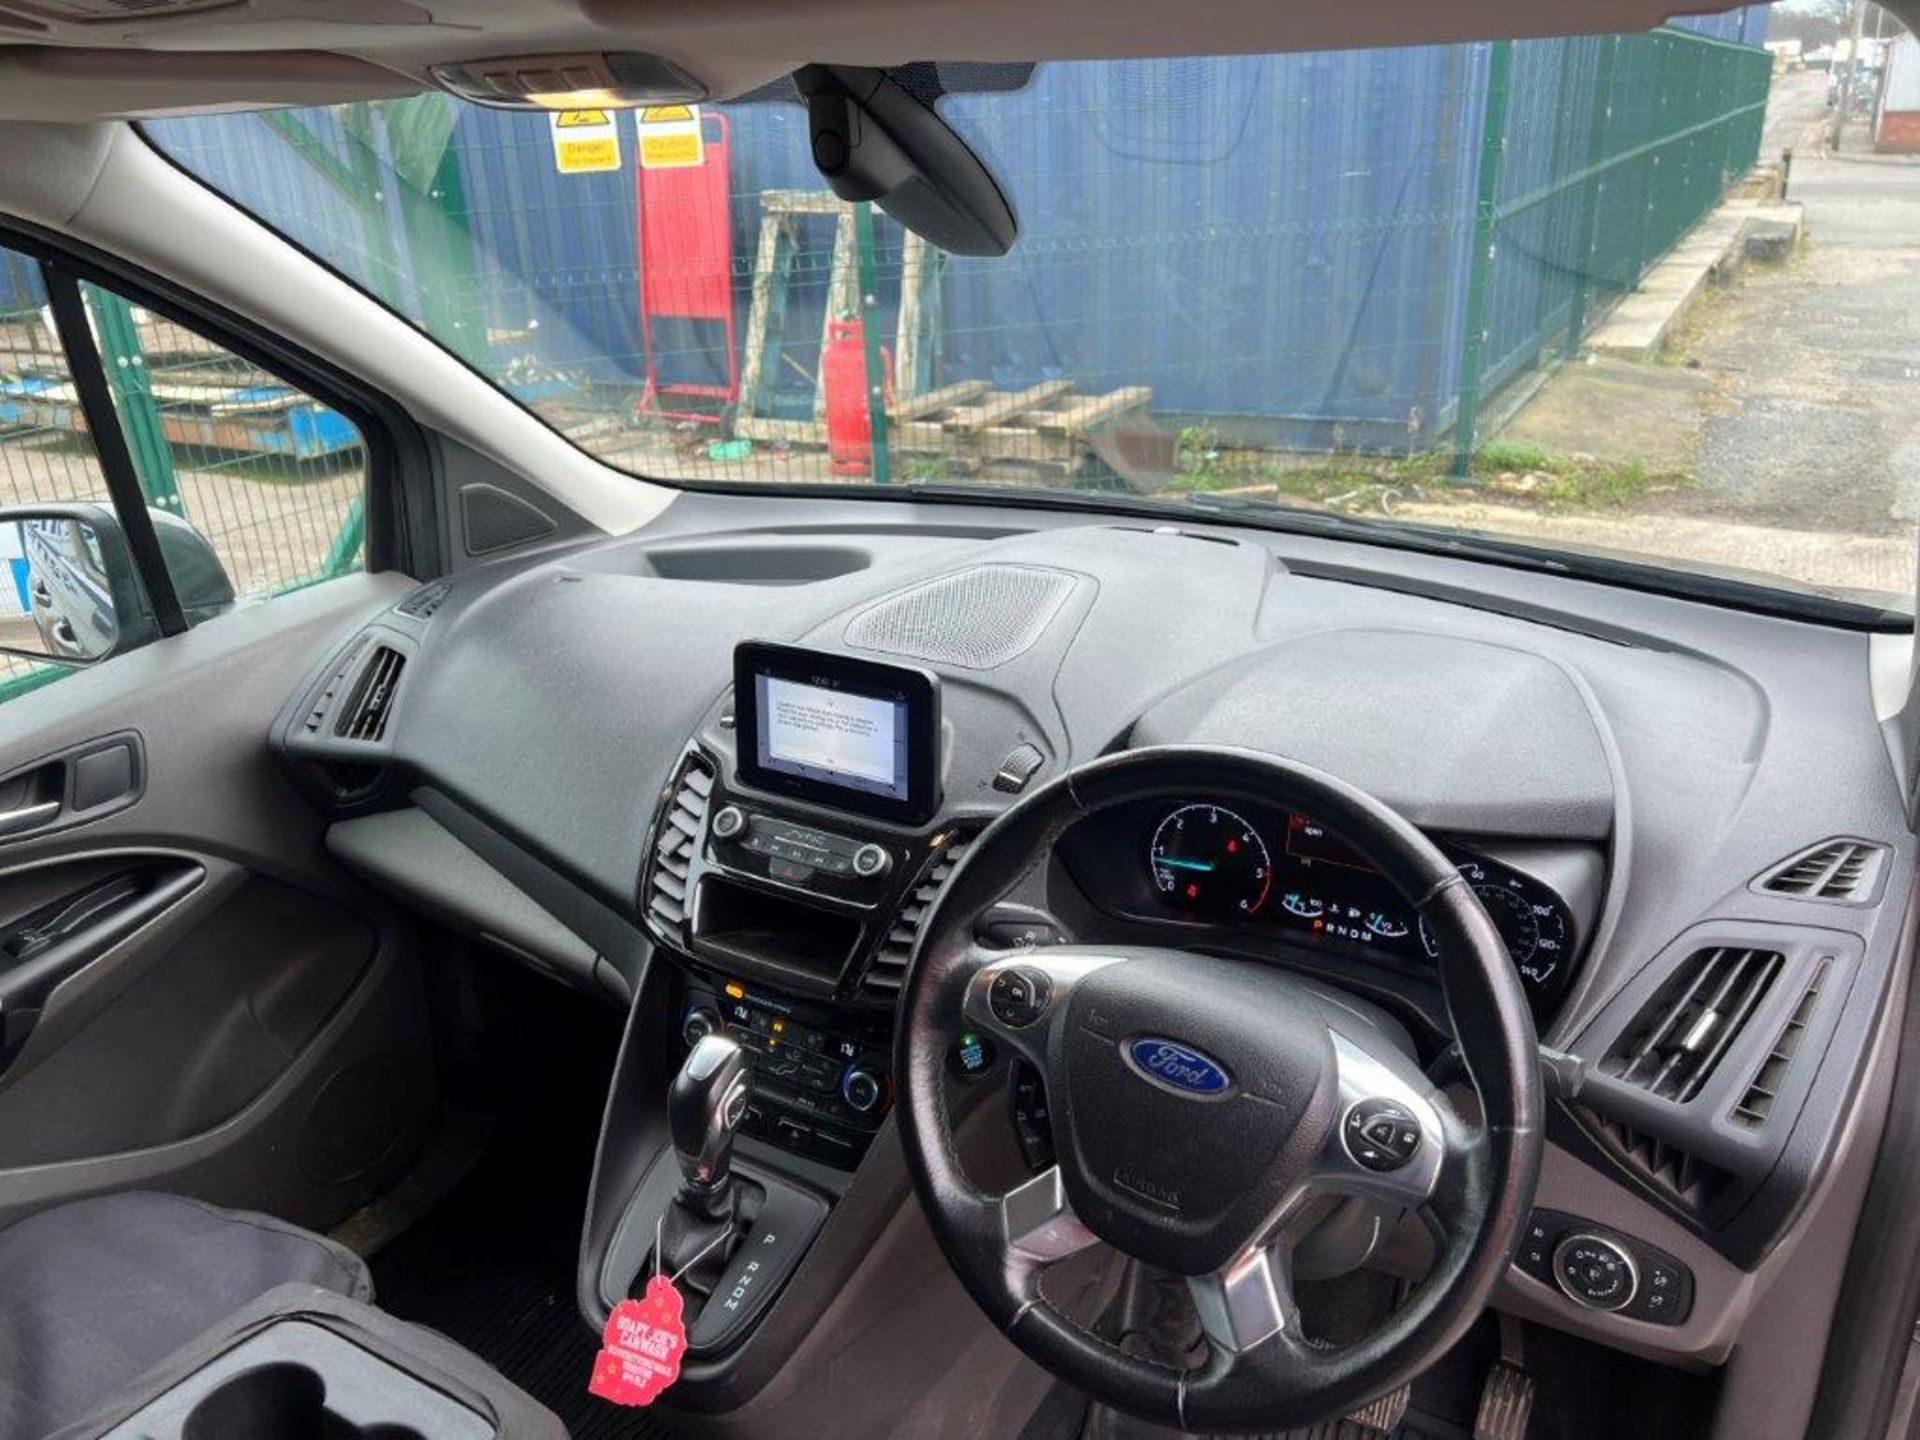 Ford Transit Connect 200 LTD TDCI Auto, Euro 6, 2019, facelift dash/screen - Image 9 of 16